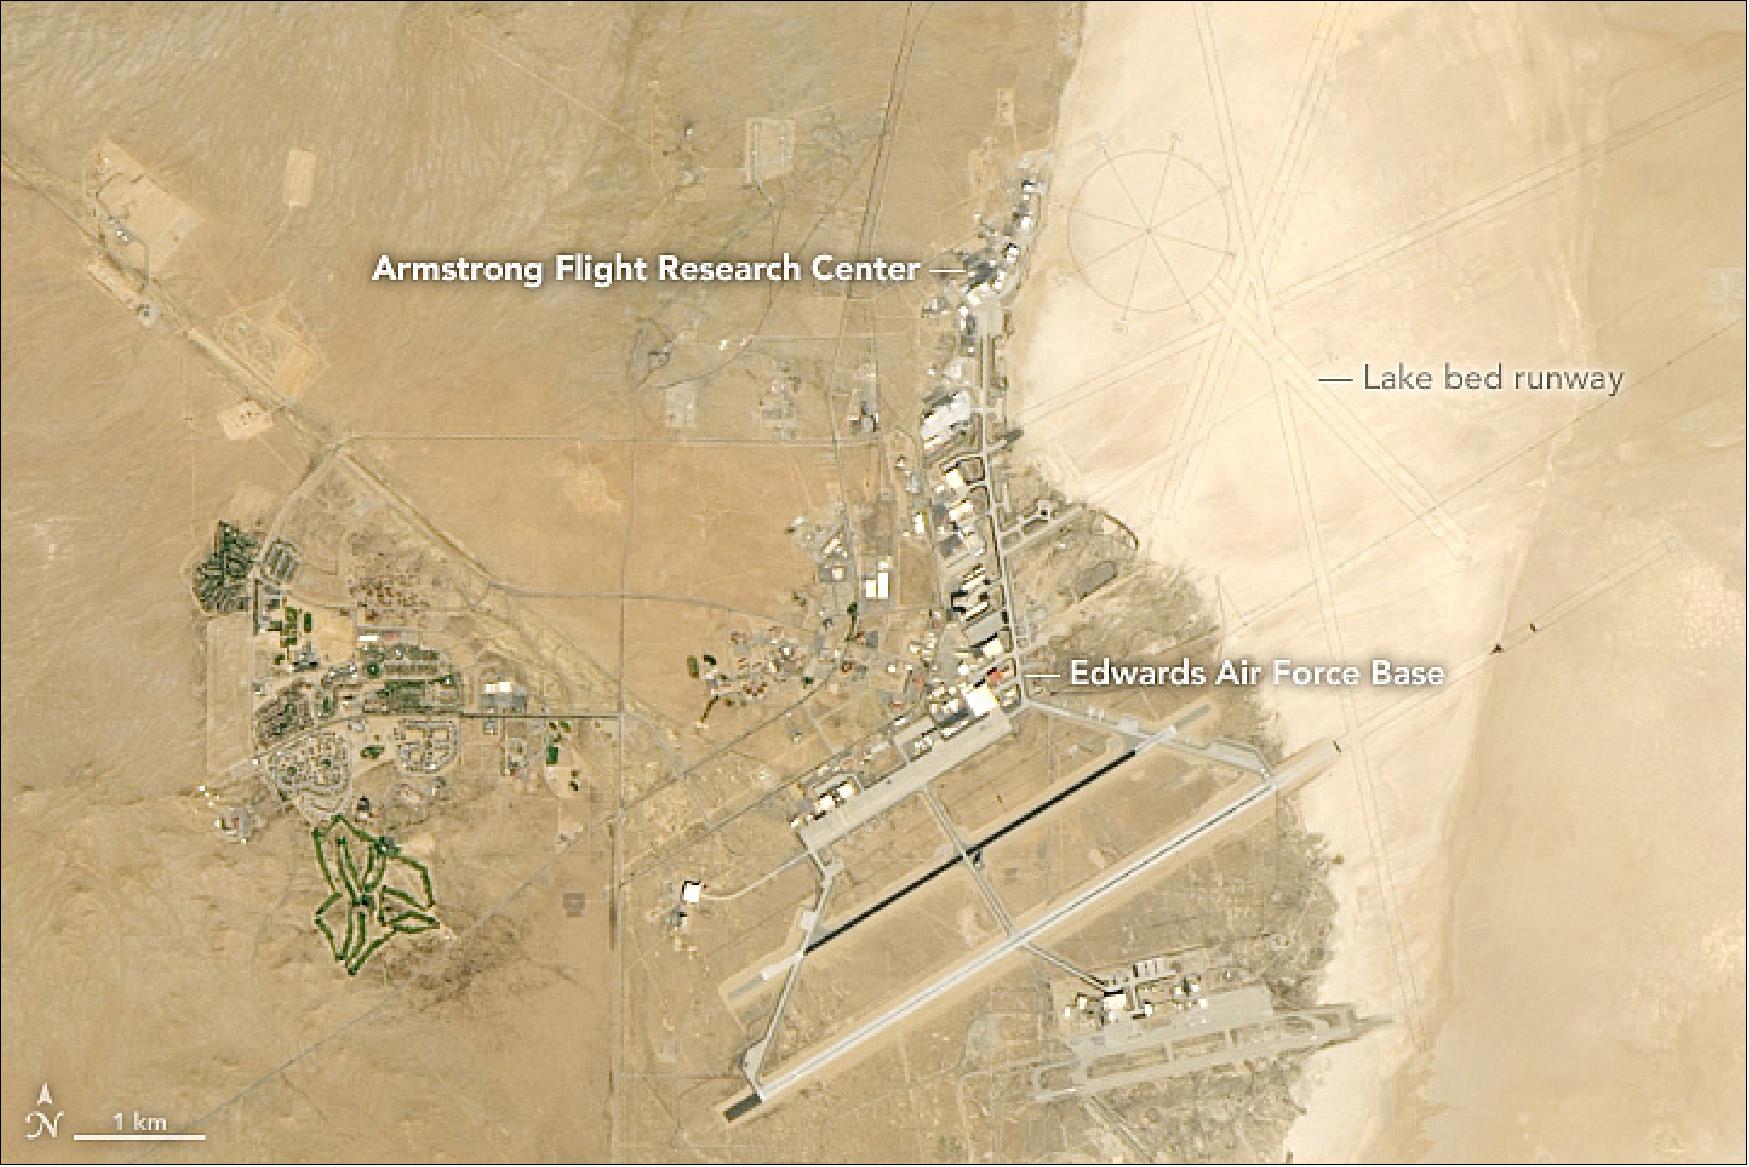 Figure 86: OLI on Landsat-8 captured this image of Edwards Air Force Base and Armstrong Flight Research Center on October 18, 2018. The image showcases the world’s largest compass rose, which was placed there to help pilots land even if navigational equipment fails. Several “drawn on” runways are also visible crisscrossing the surface of the dry lake. The main concrete runway at Edwards Air Force Base, in combination with the lakebed, offers pilots one of the longest and safest runways in the world (image credit: NASA Earth Observatory, images by Lauren Dauphin, using Landsat data from the U.S. Geological Survey. Story by Adam Voiland)